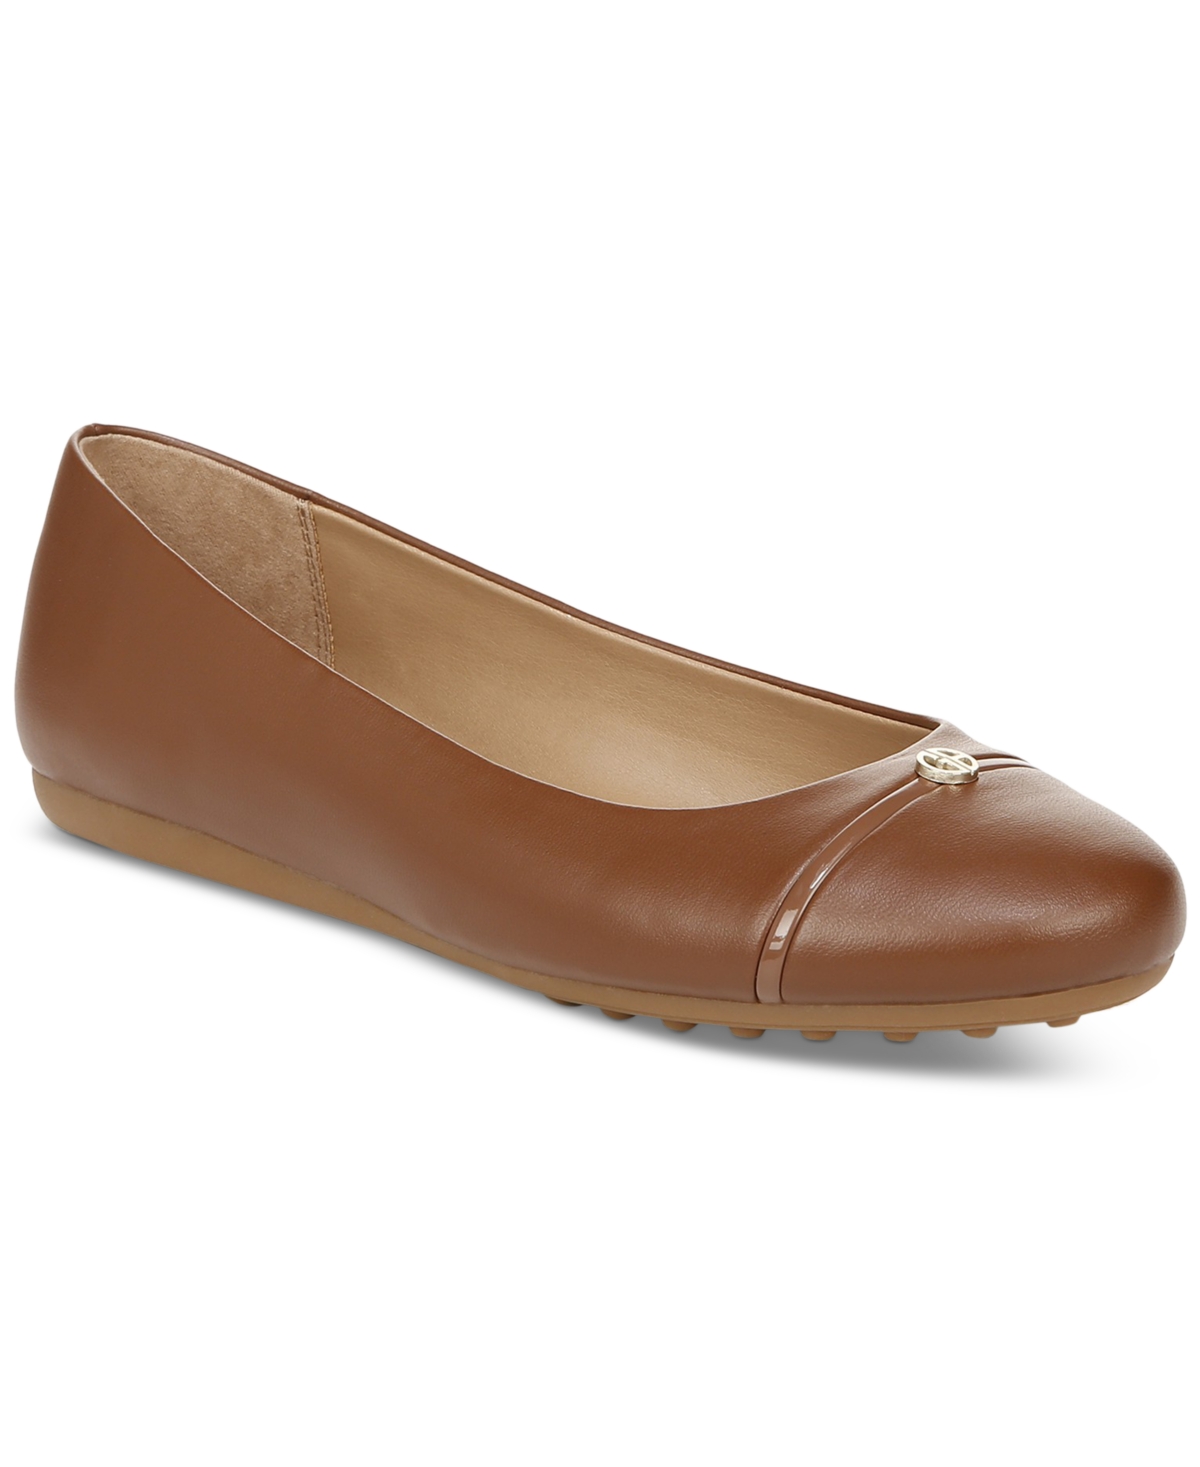 Women's Agnness Slip-On Cap-Toe Flats, Created for Macy's - Saddle Brown